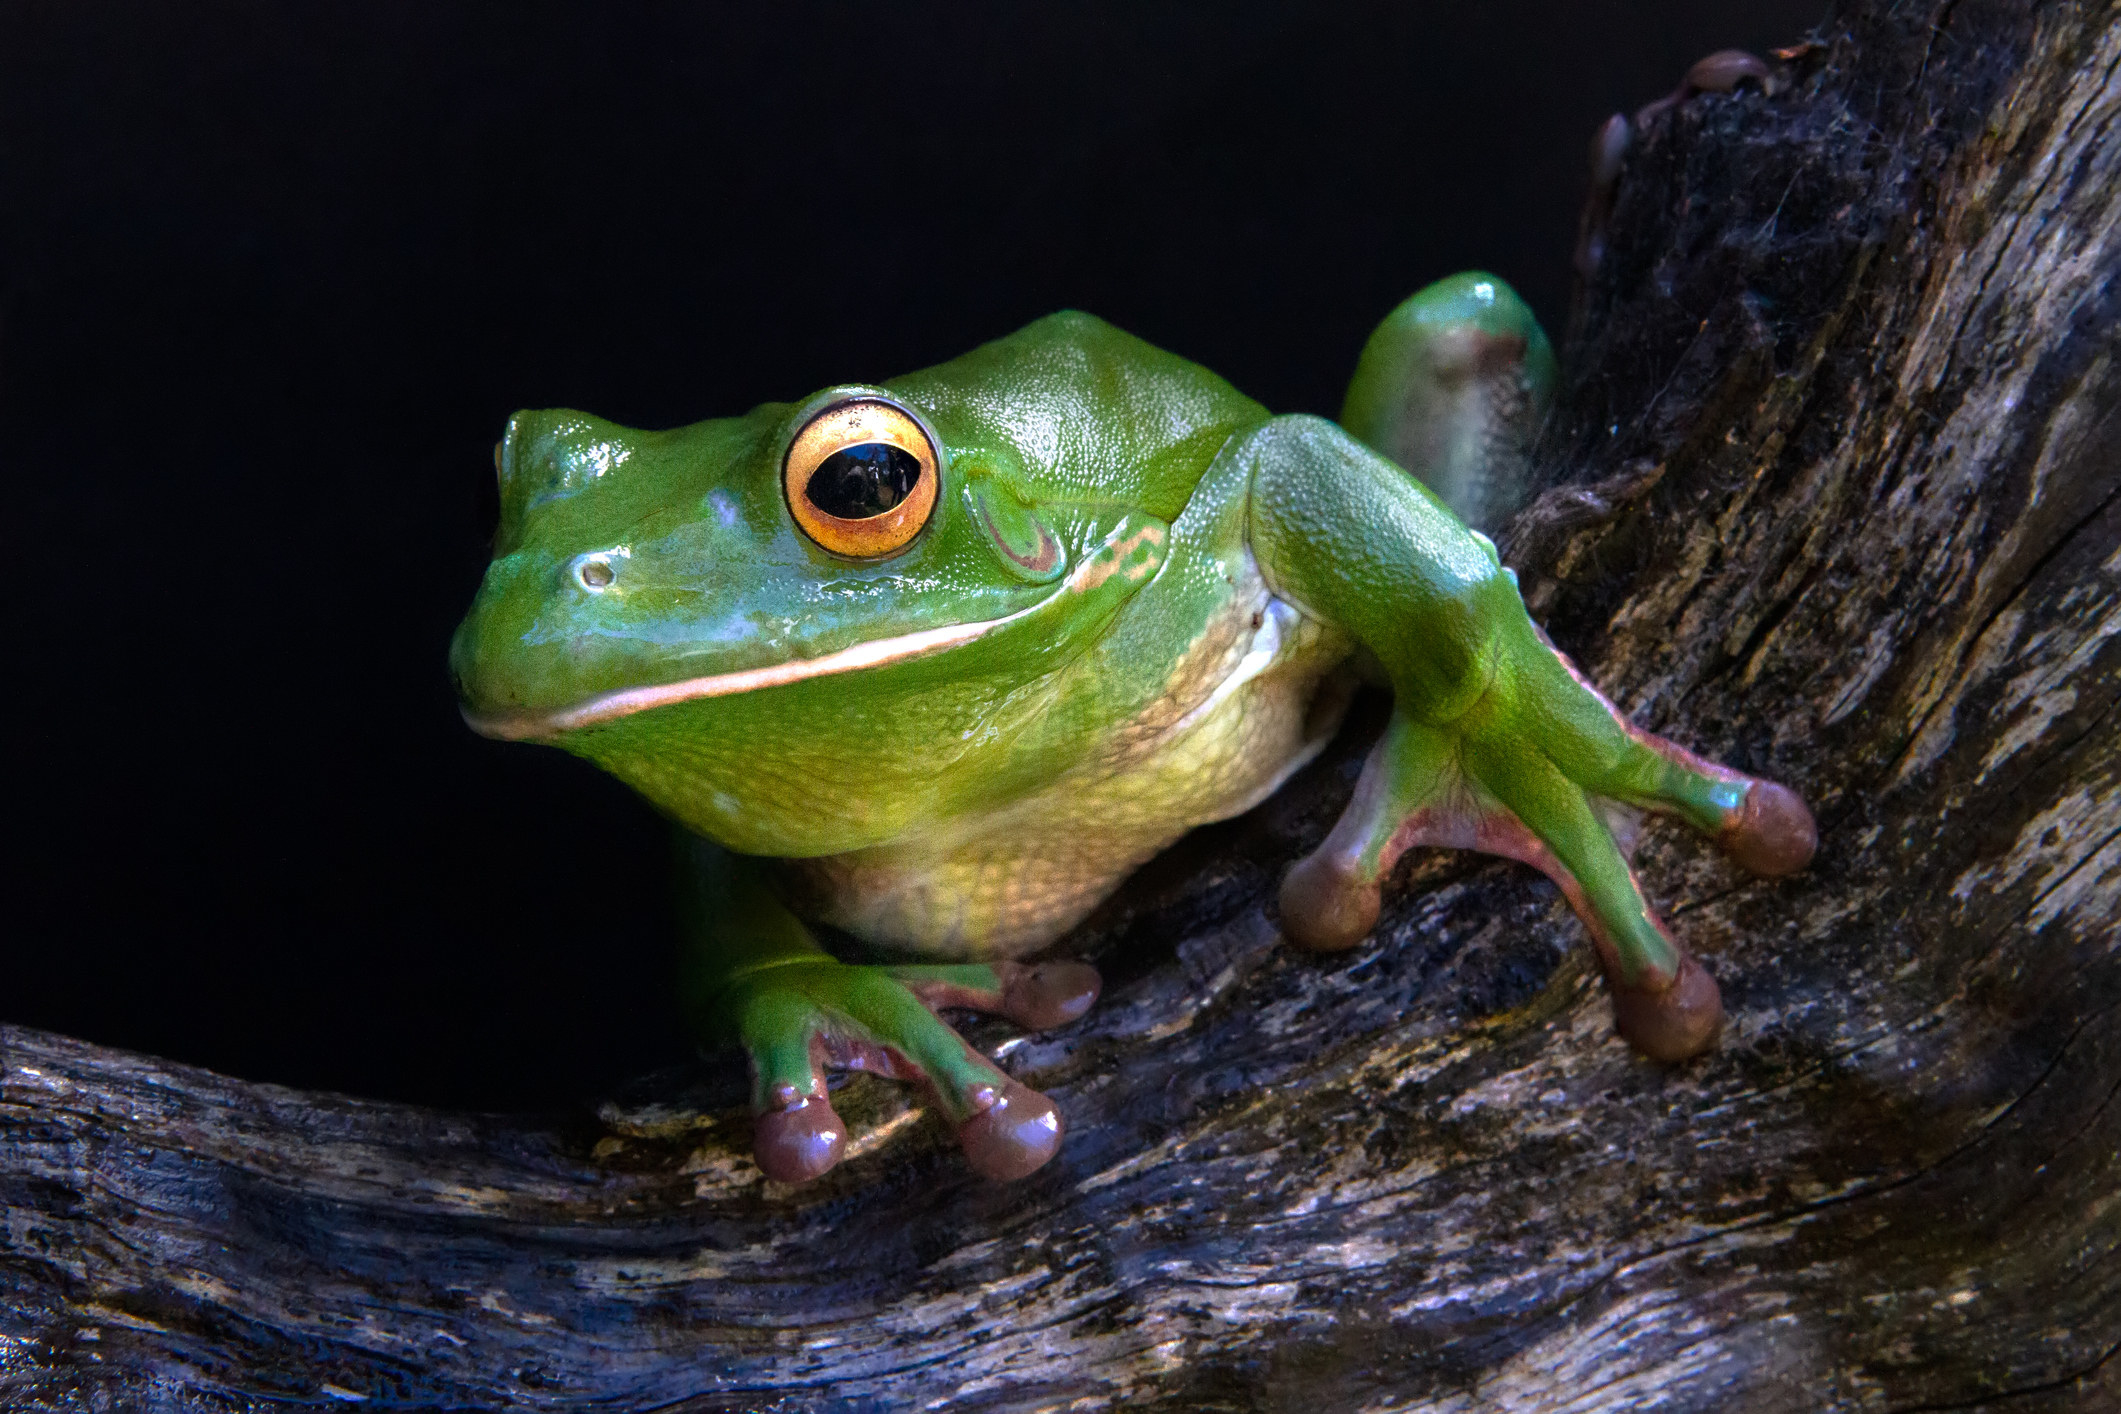 A white lipped tree frog perched in the bow of a piece of wood